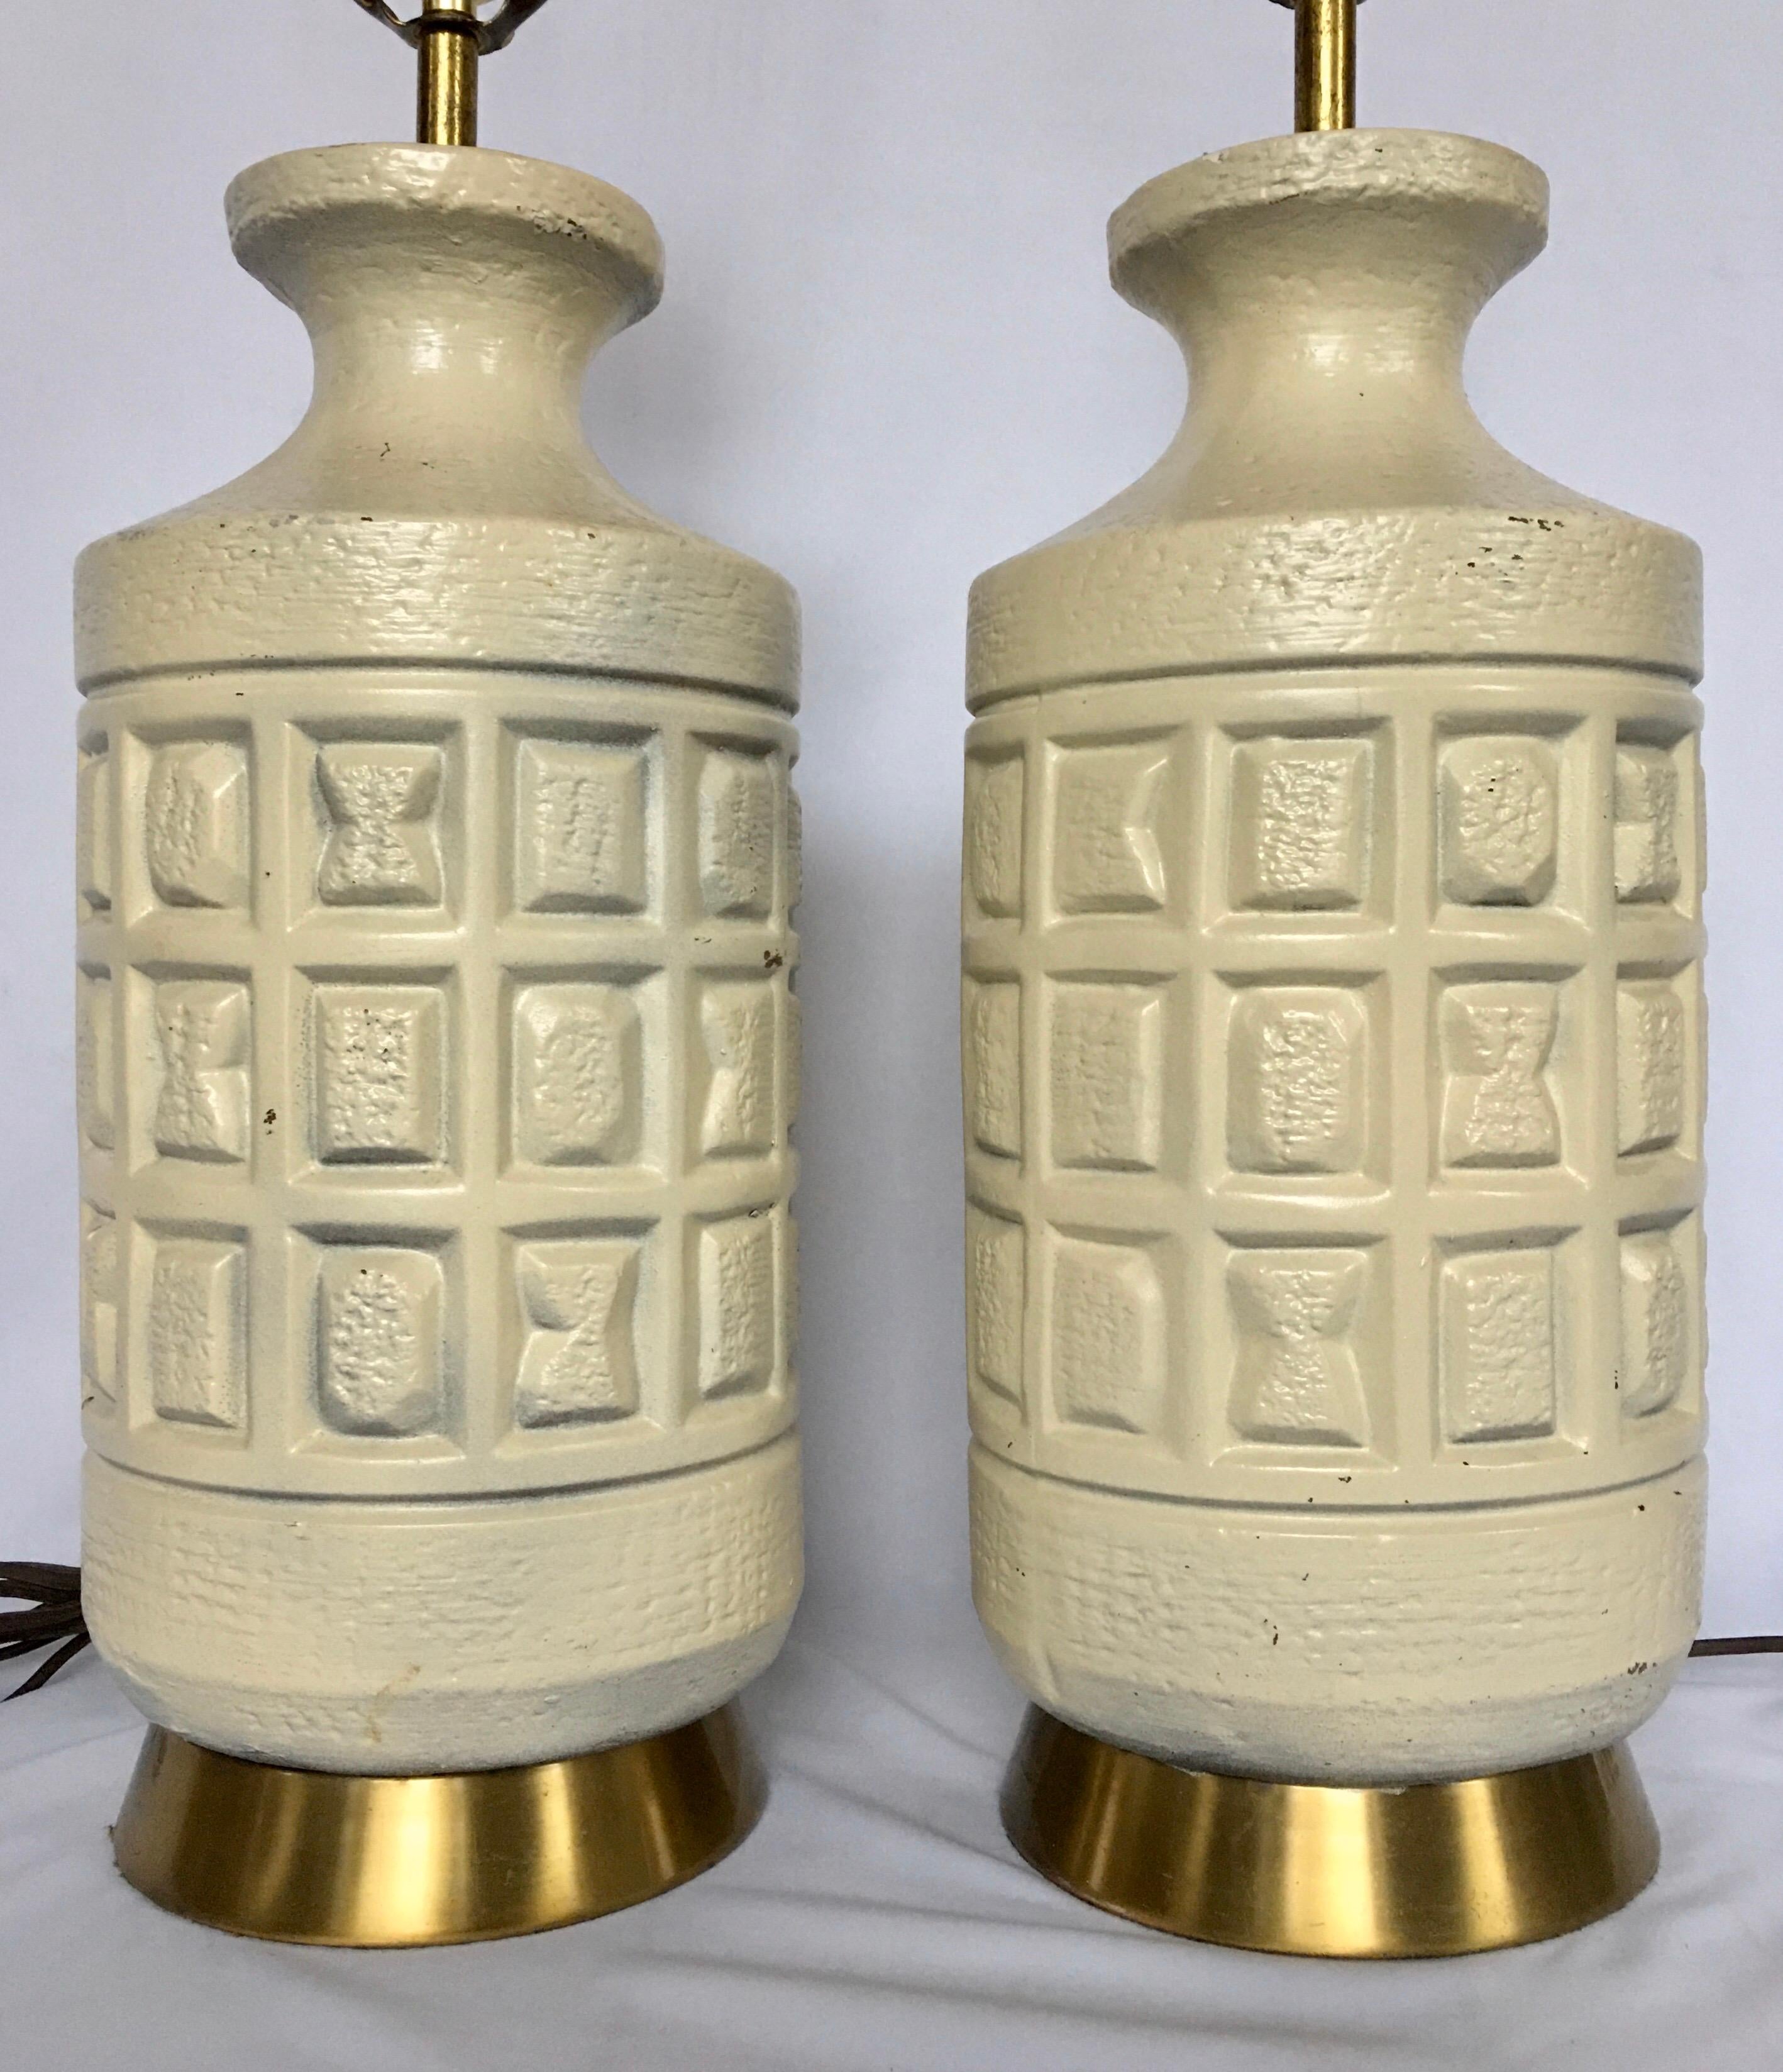 Mid-Century Modern Brutalist pottery table lamps. These cubist form table lamps feature sculptural matte cream pottery bases imprinted with geometric forms mounted on brass bases. 

Measures: Height to Socket 22 inches.
Height to Harp 30 inches.